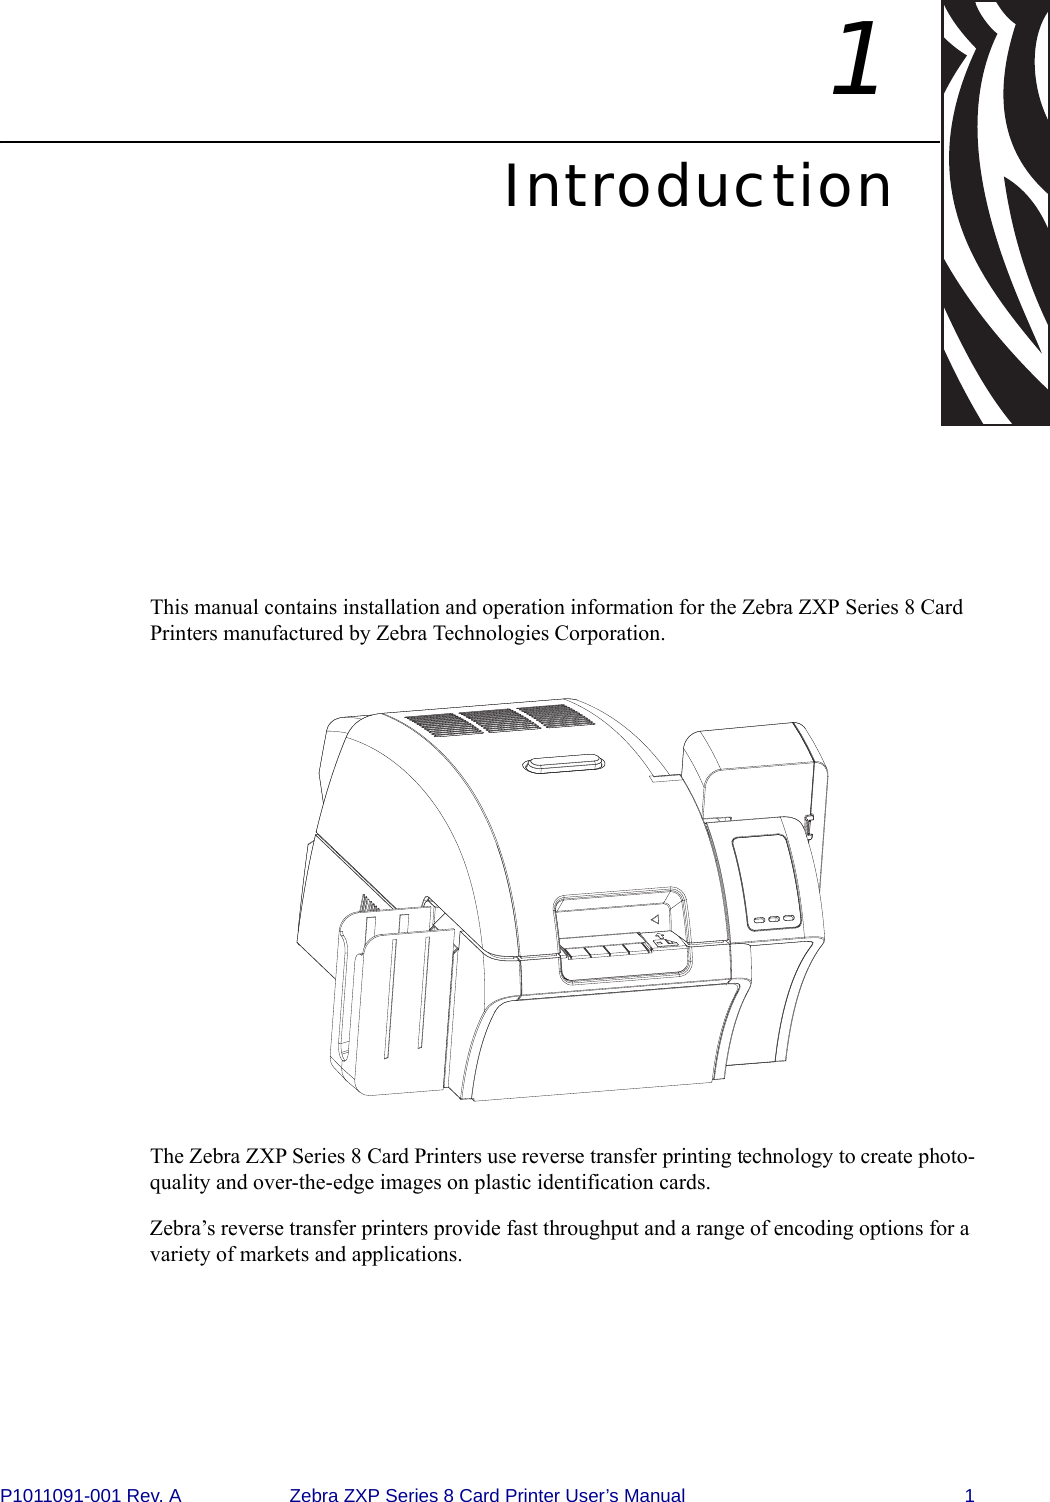 P1011091-001 Rev. A Zebra ZXP Series 8 Card Printer User’s Manual 11IntroductionThis manual contains installation and operation information for the Zebra ZXP Series 8 Card Printers manufactured by Zebra Technologies Corporation.The Zebra ZXP Series 8 Card Printers use reverse transfer printing technology to create photo-quality and over-the-edge images on plastic identification cards. Zebra’s reverse transfer printers provide fast throughput and a range of encoding options for a variety of markets and applications.